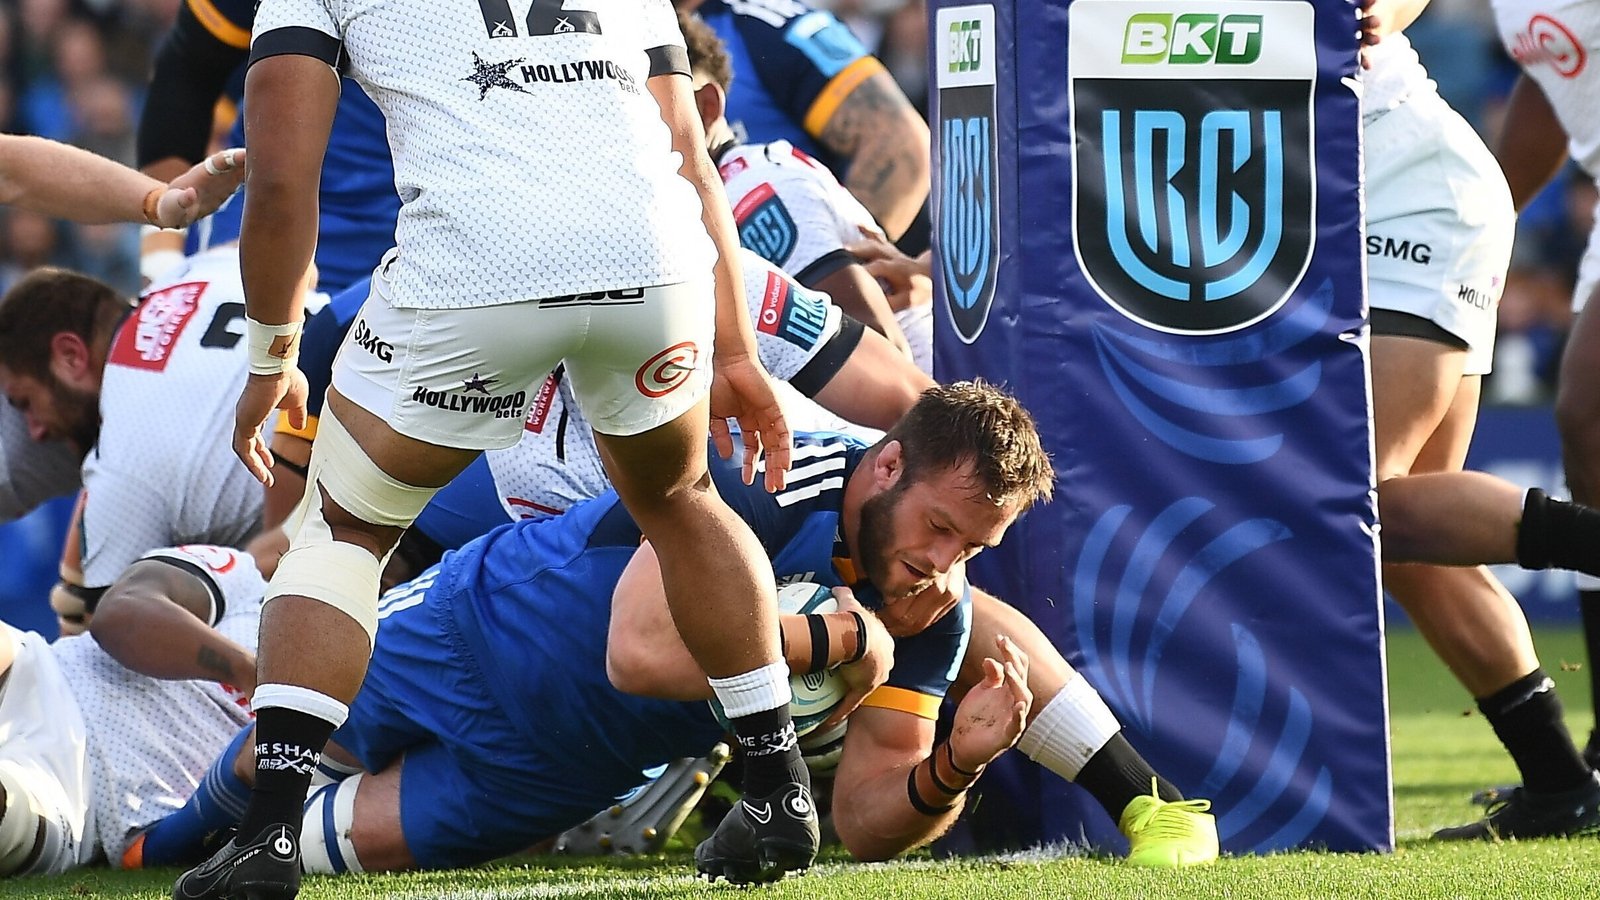 United Rugby Championship Leinster 54-34 Sharks recap